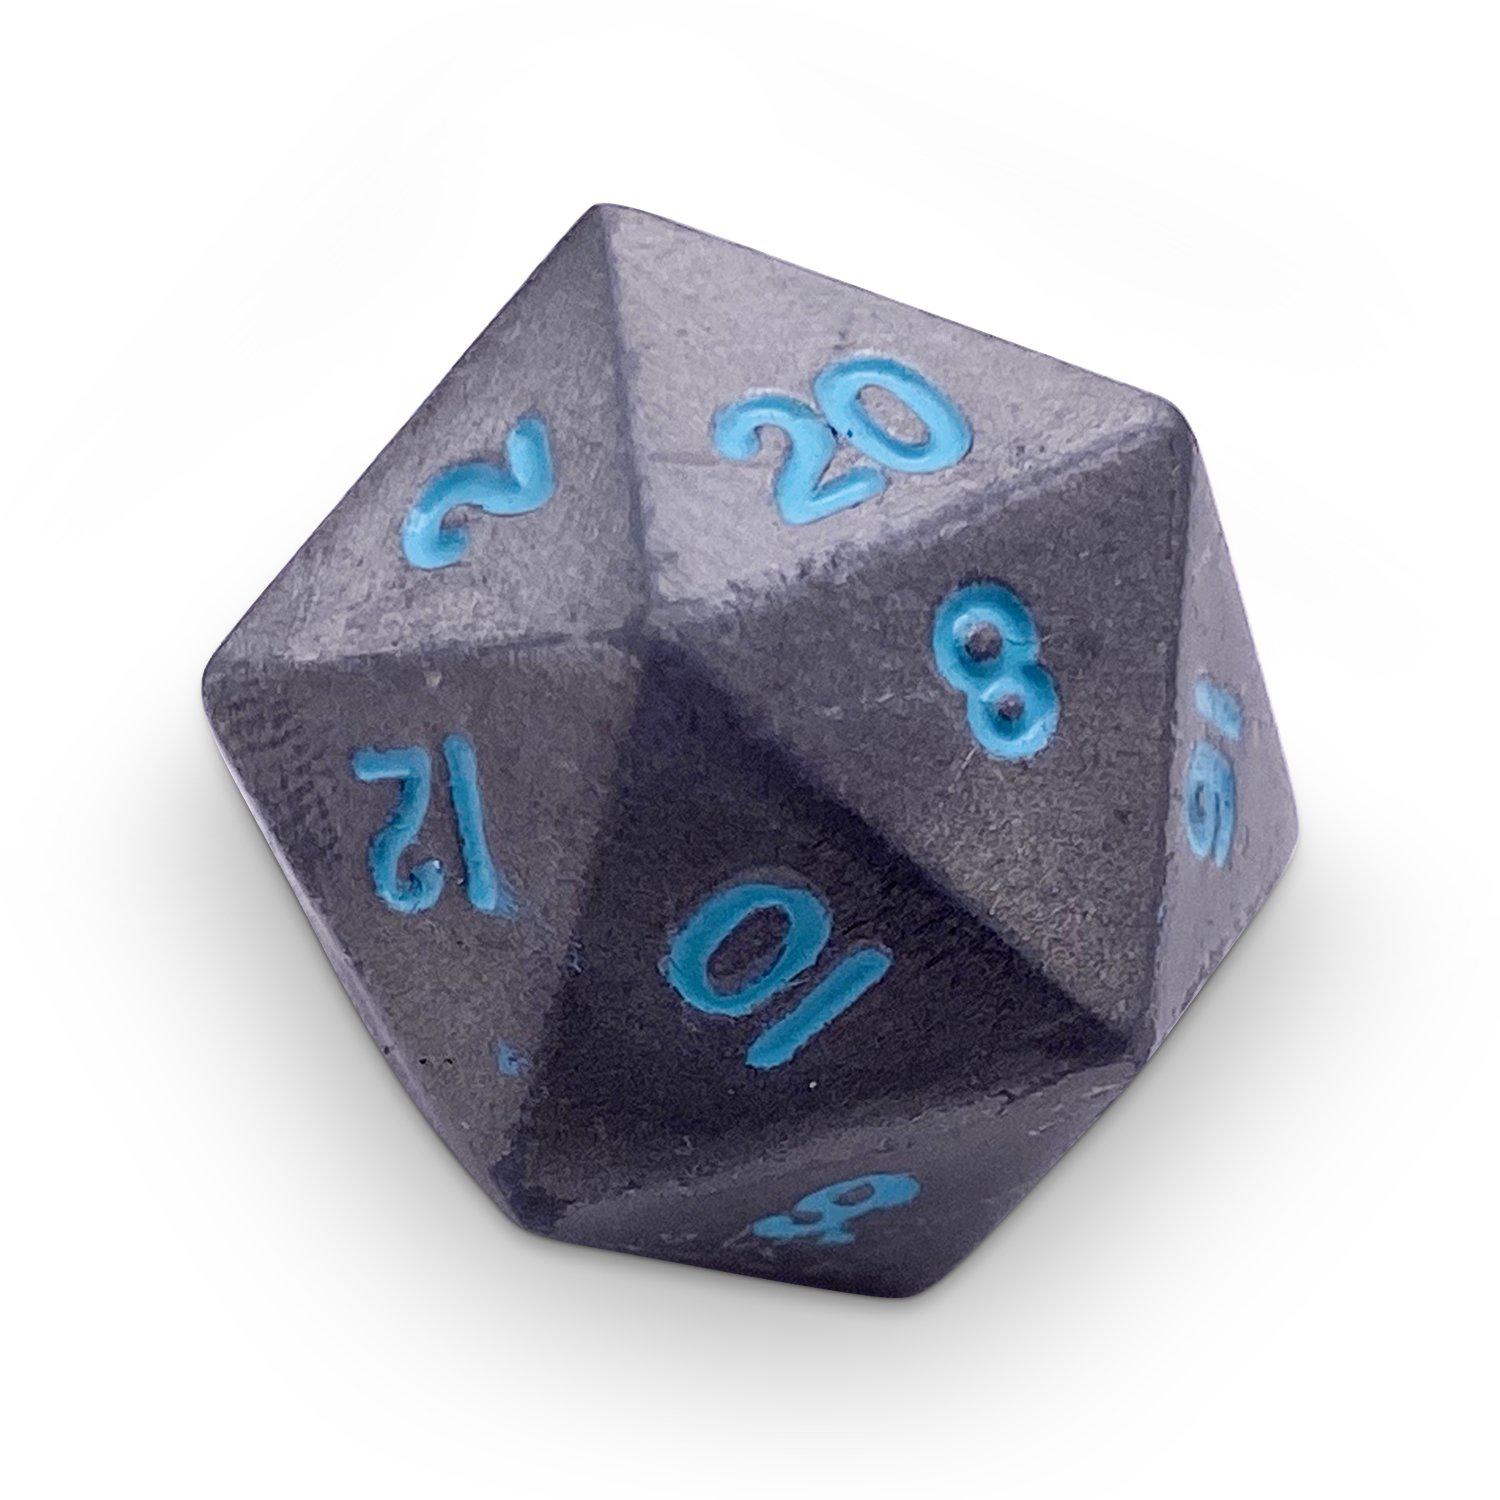 Single Alloy D20 in Spellbound by Norse Foundry - NOR 04567